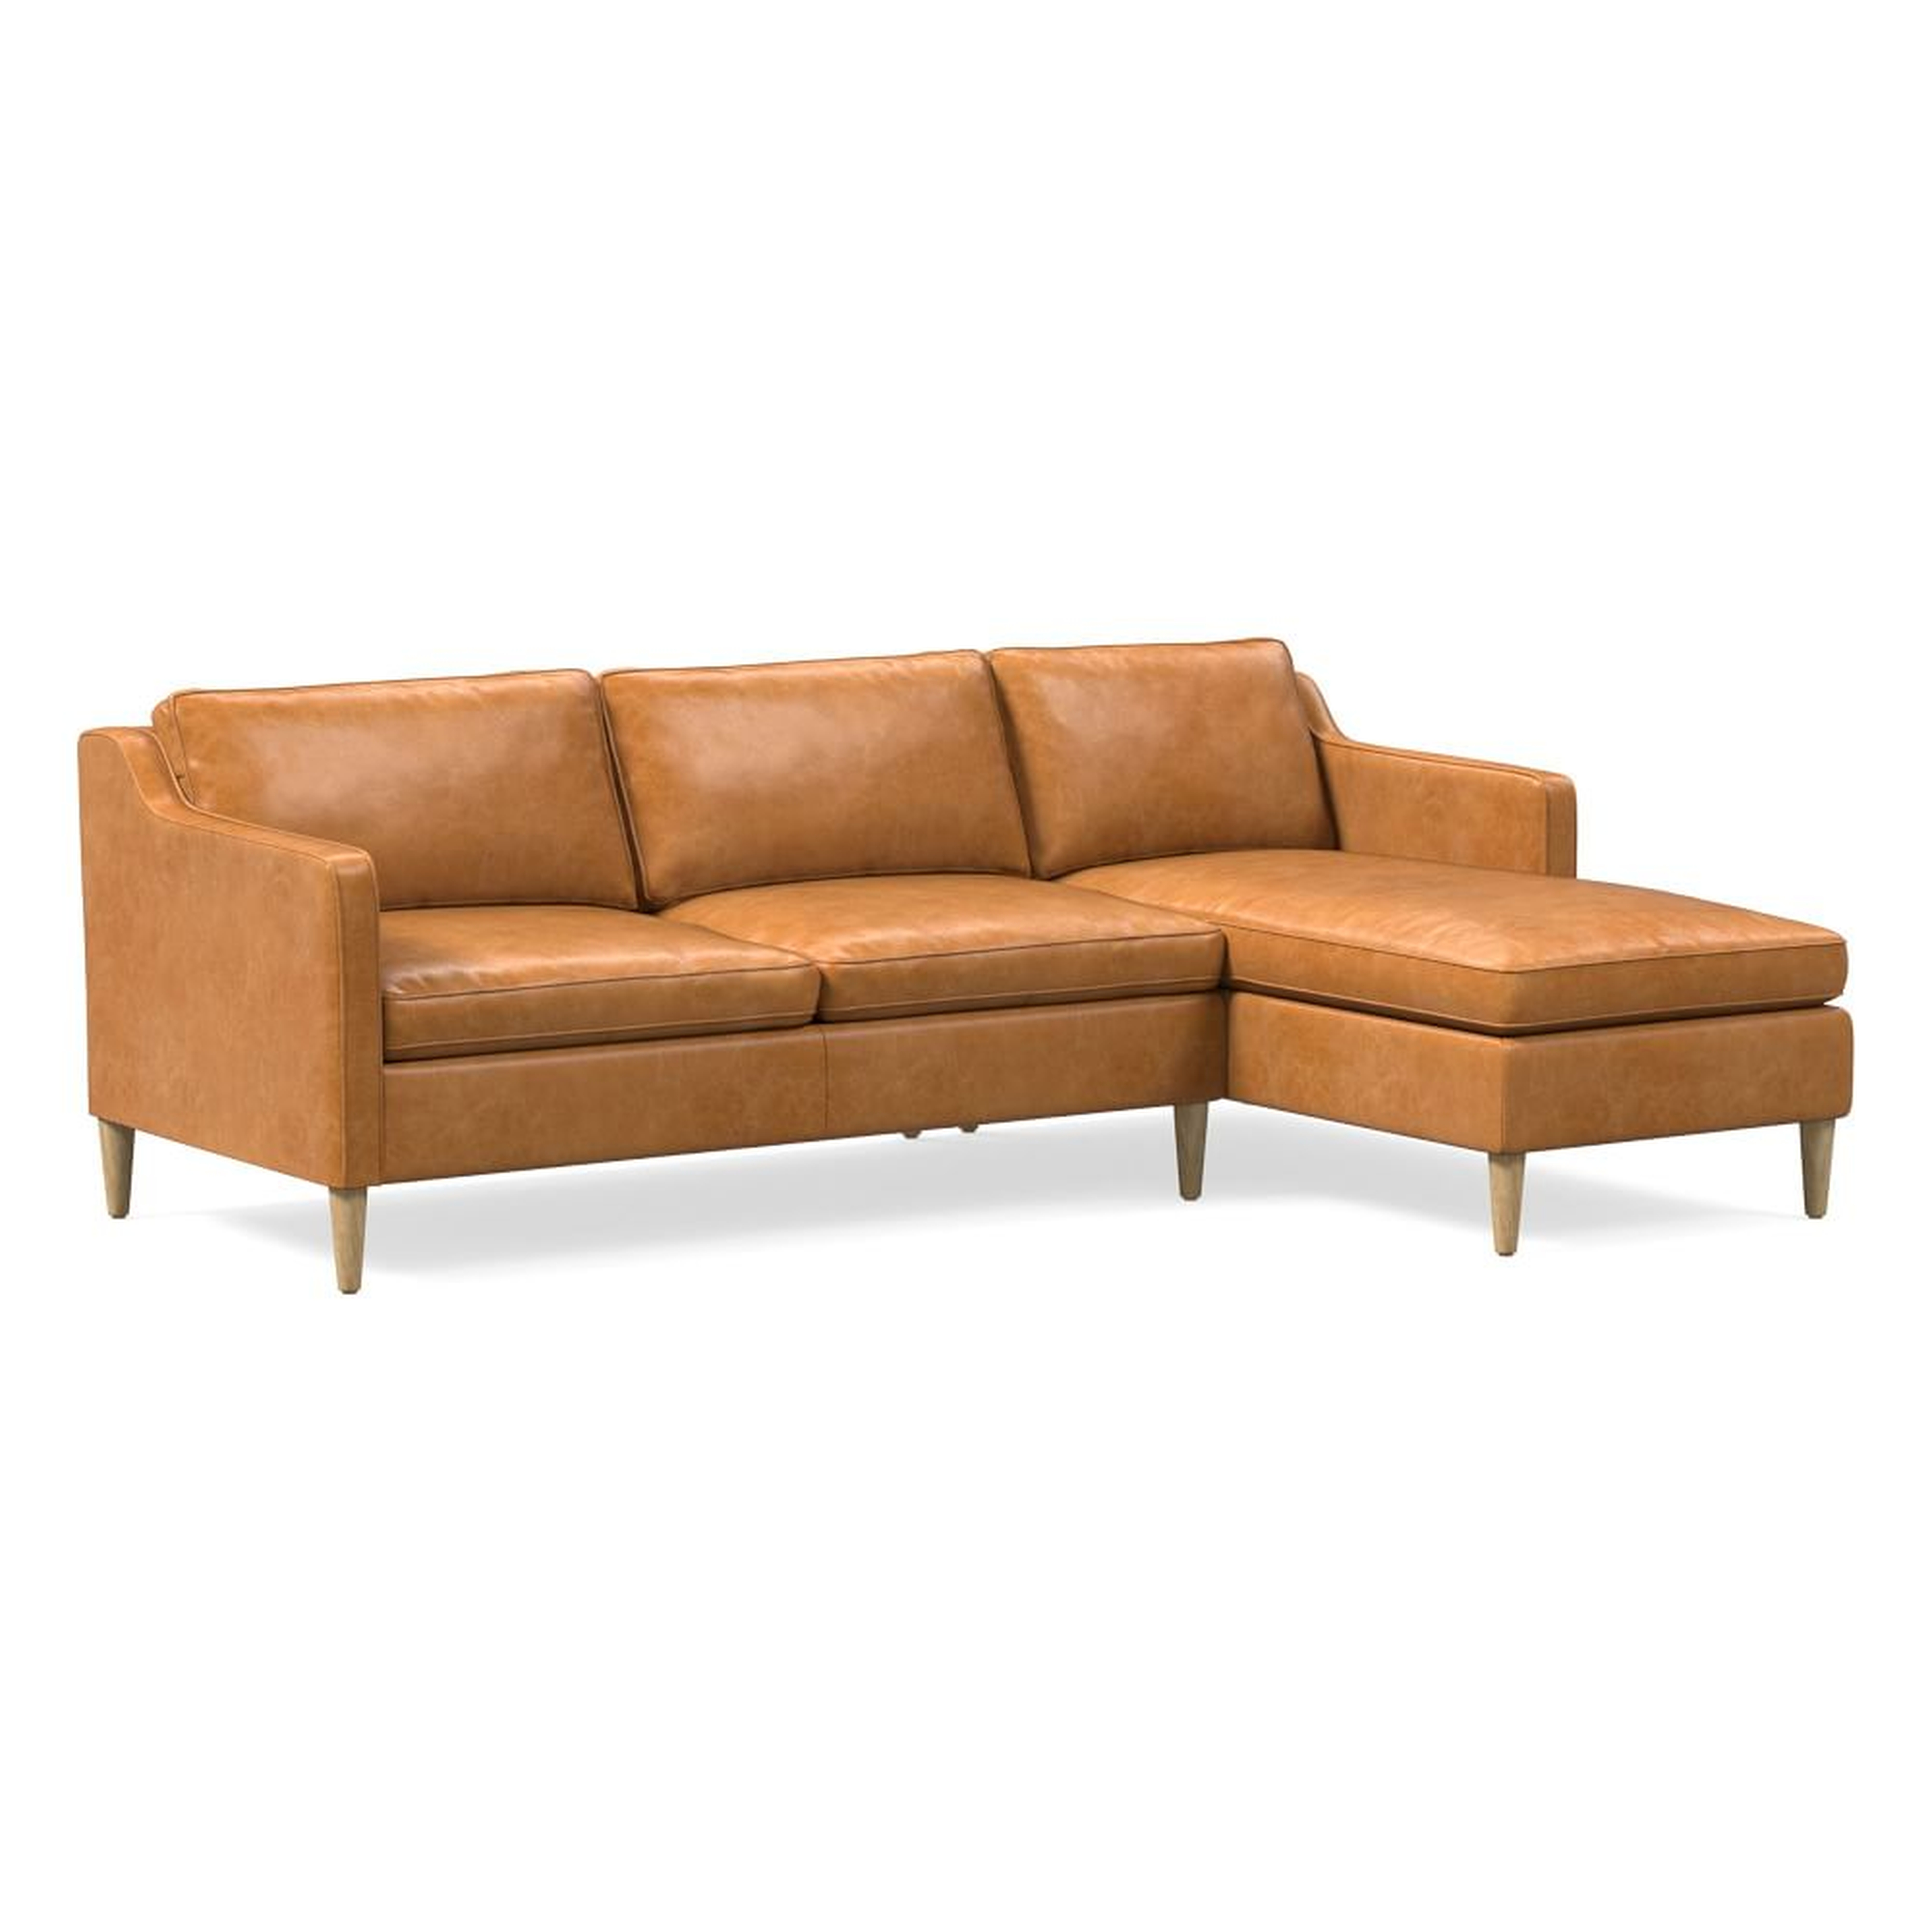 Hamilton 93" Right 2-Piece Chaise Sectional, Charme Leather, Burnt Sienna, Almond - West Elm